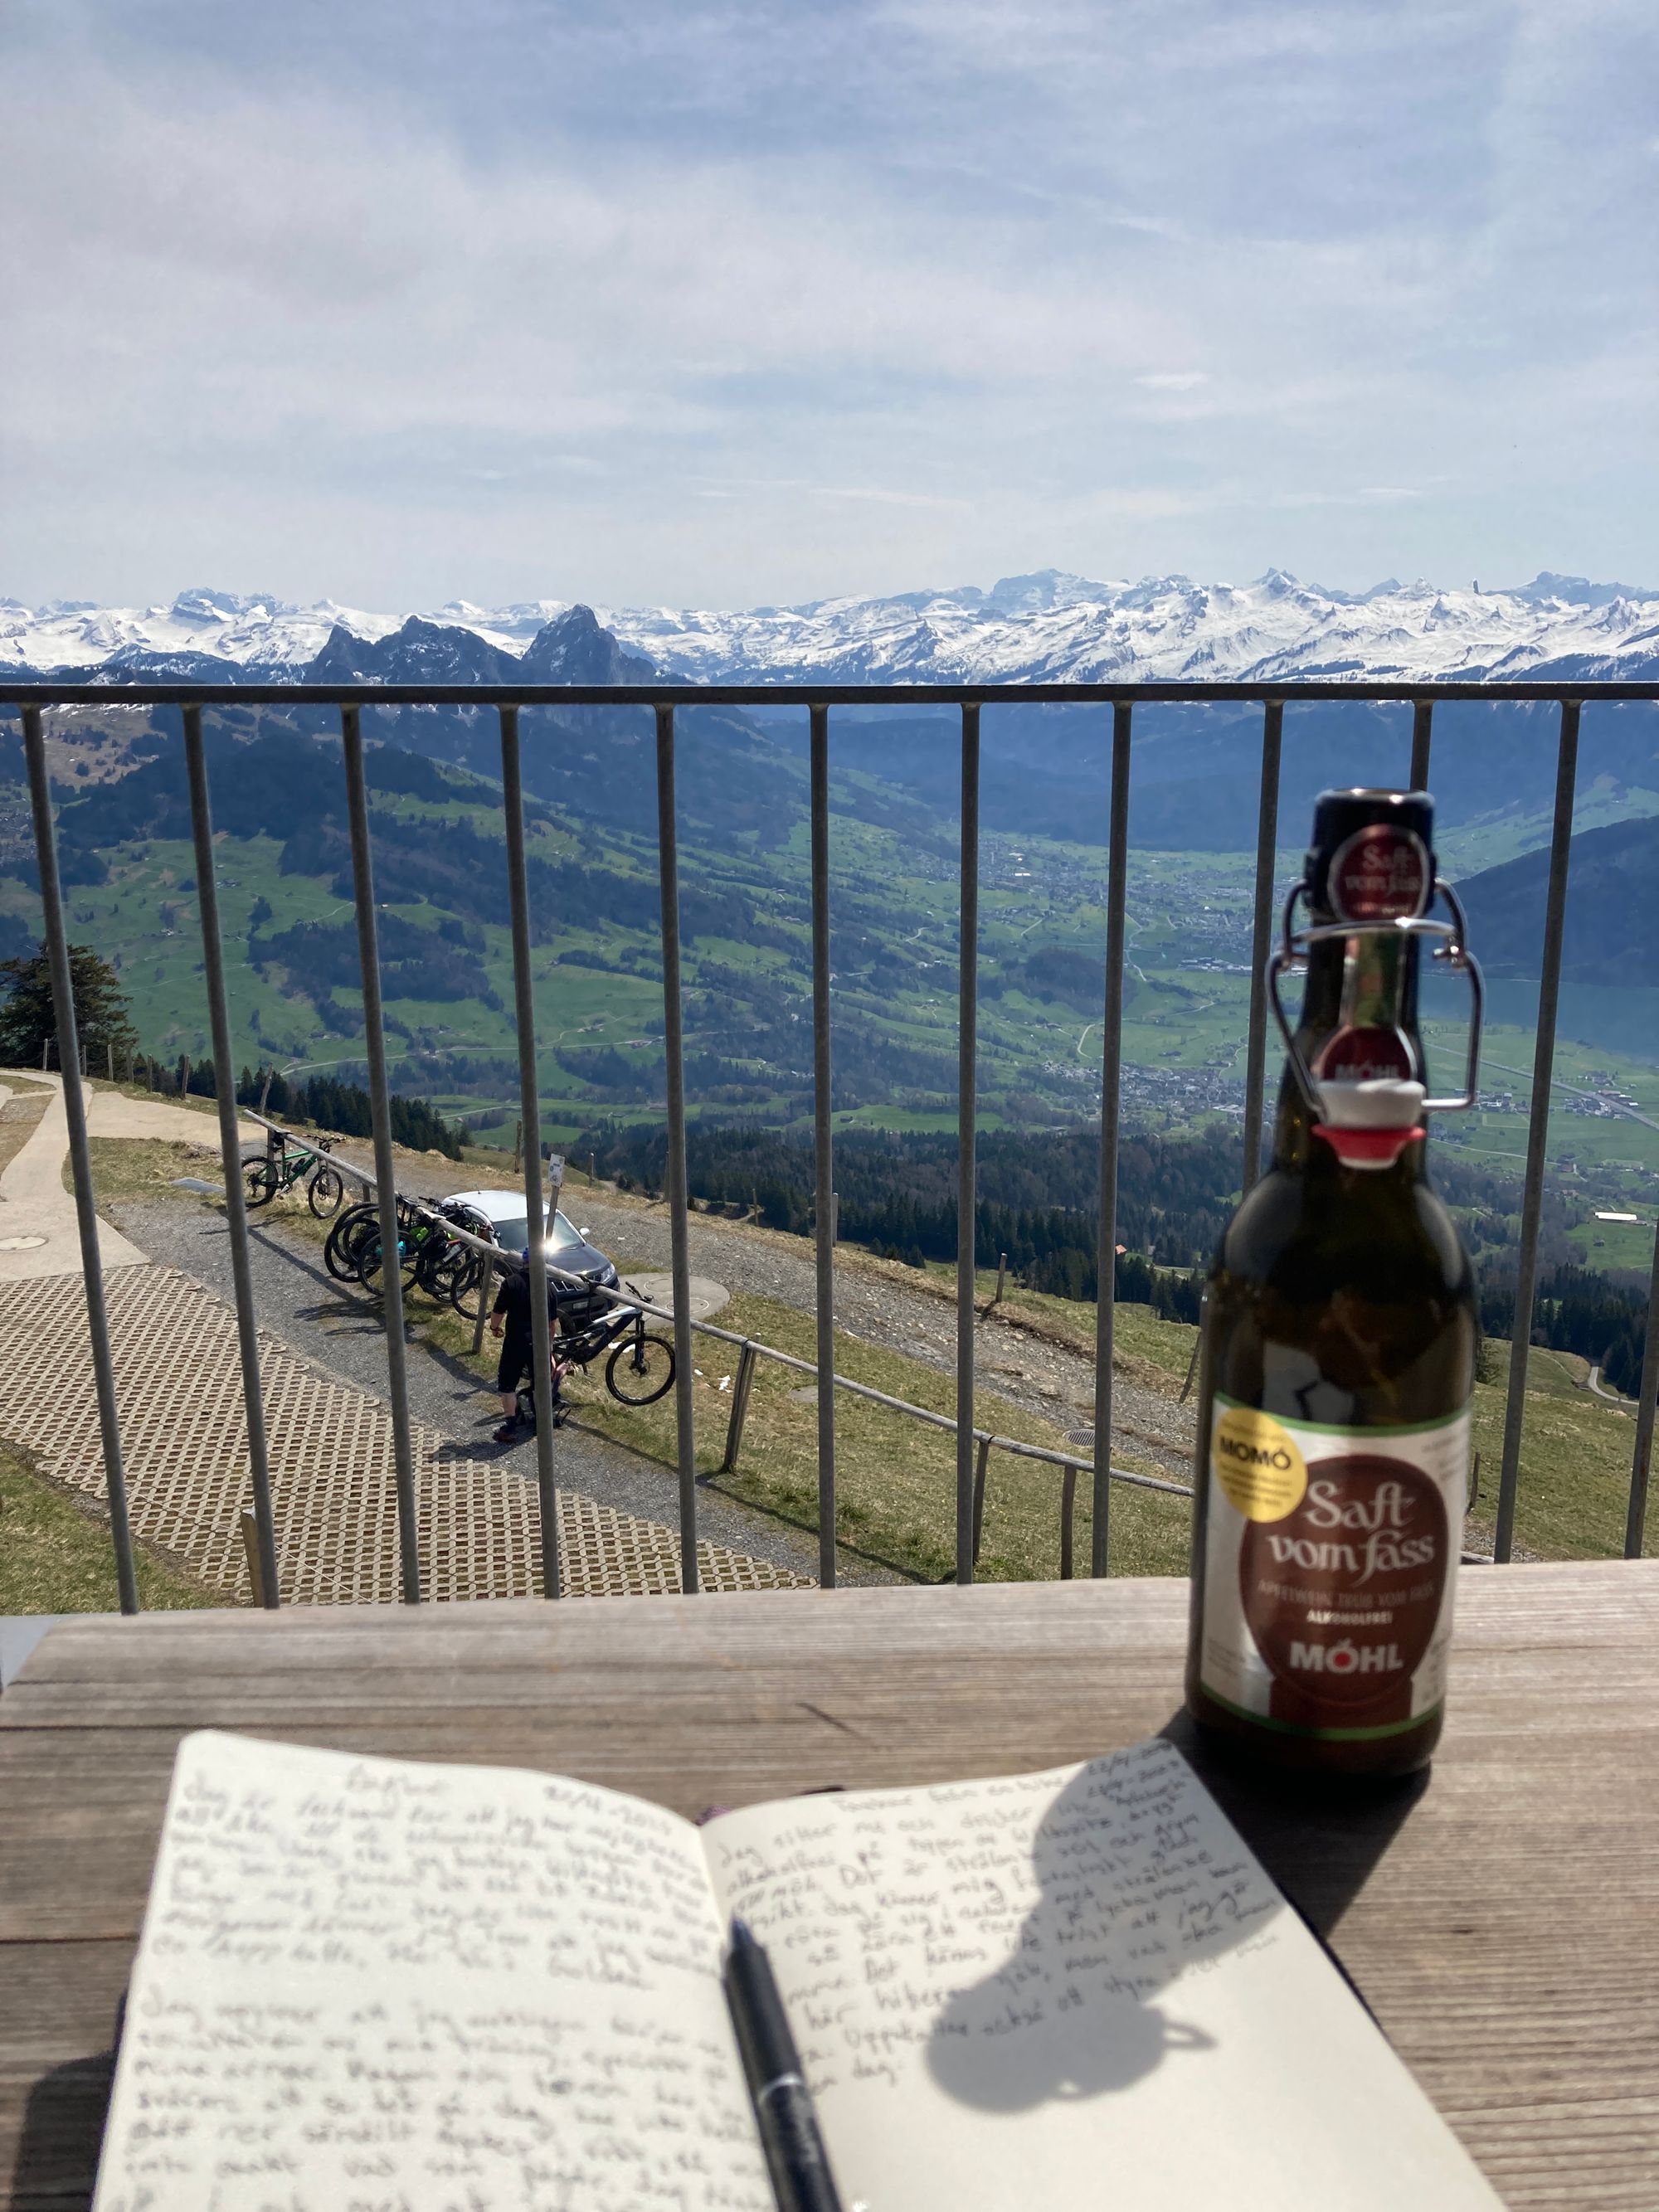 An open journal with a pen, on a table with a bottle next to it. The background is an alpine valley and snowcapped mountains.